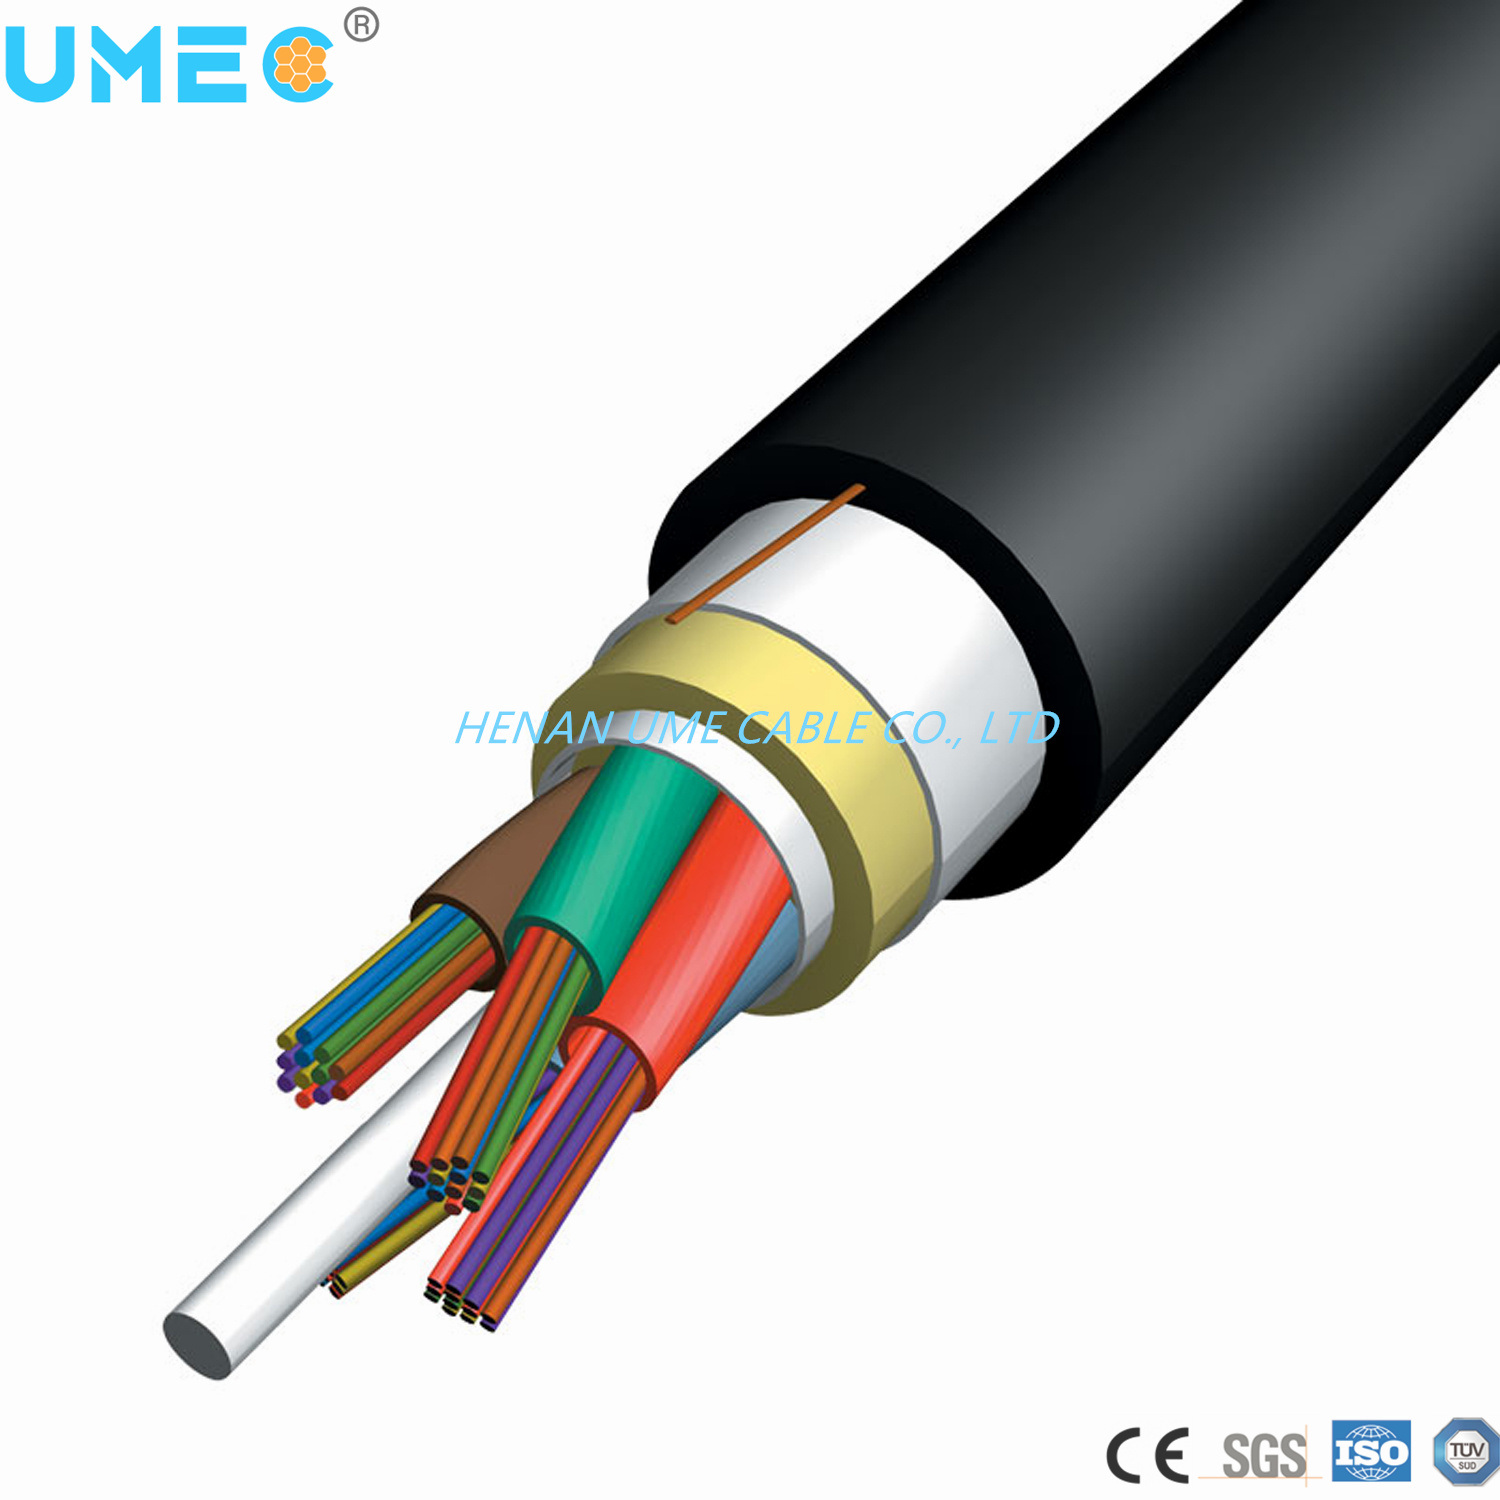 All Dielectric Self-Supporting ADSS Cable